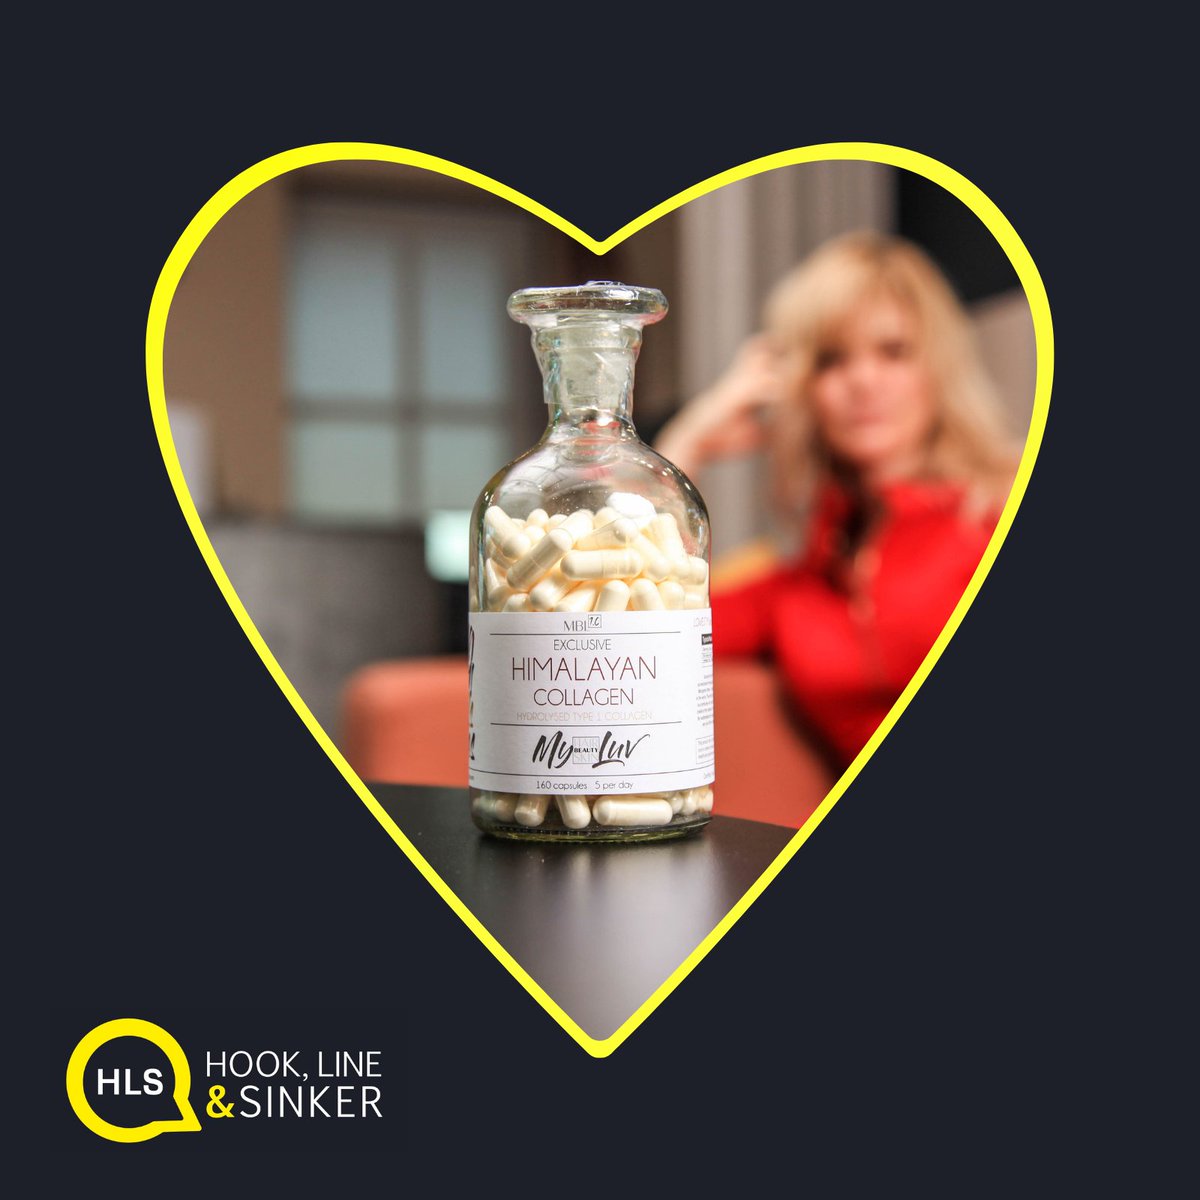 Luv at first sight! This #ValentinesDay we're welcoming our 1st luxury nutricosmetic client, #MyBeautyLuv to the HLS hood.

This award-winning brand provides a range of professional-grade beauty supplements for wellness, anti-aging + vitality.

Read more➡️bit.ly/LuvAtFirstSight